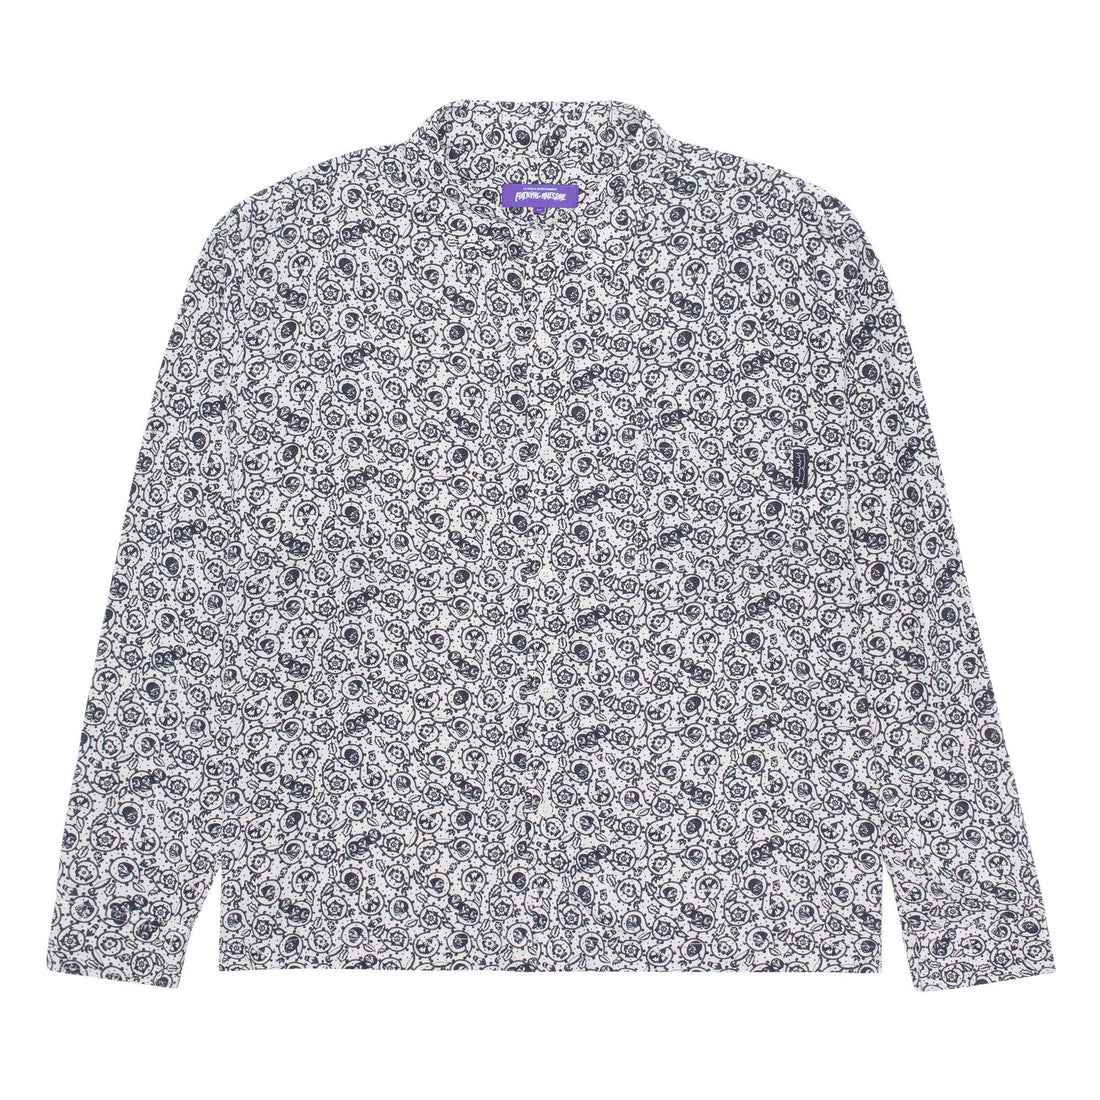 FA - FLOWER FACE L/S BUTTON UP - IVORY